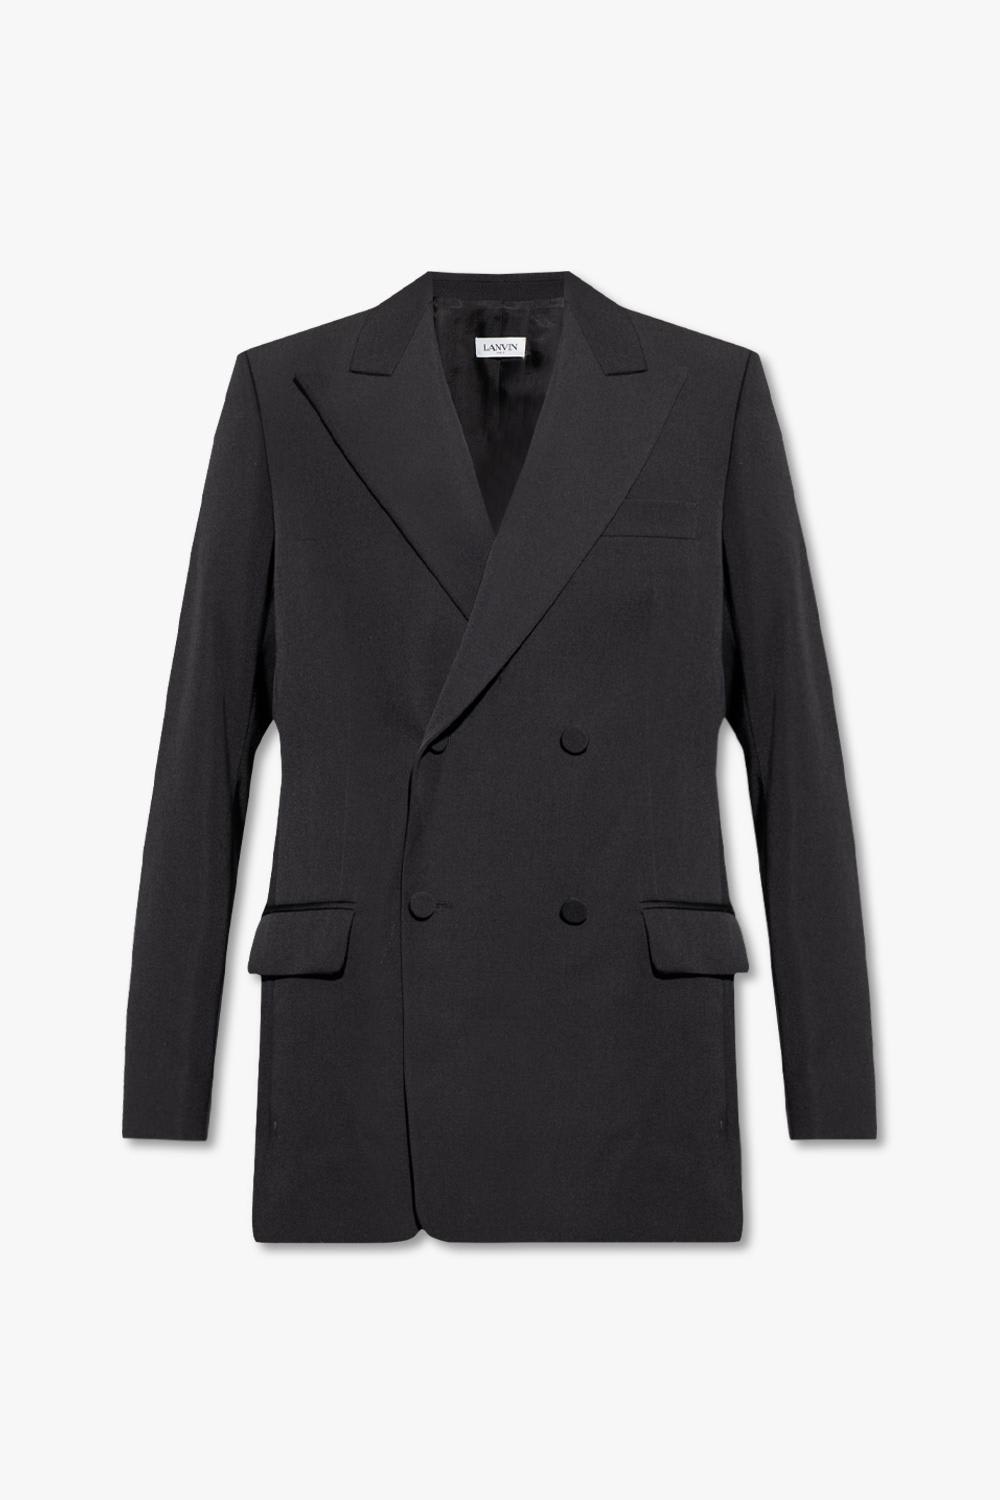 Lanvin Classic Double-breasted Plain Dinner Jacket